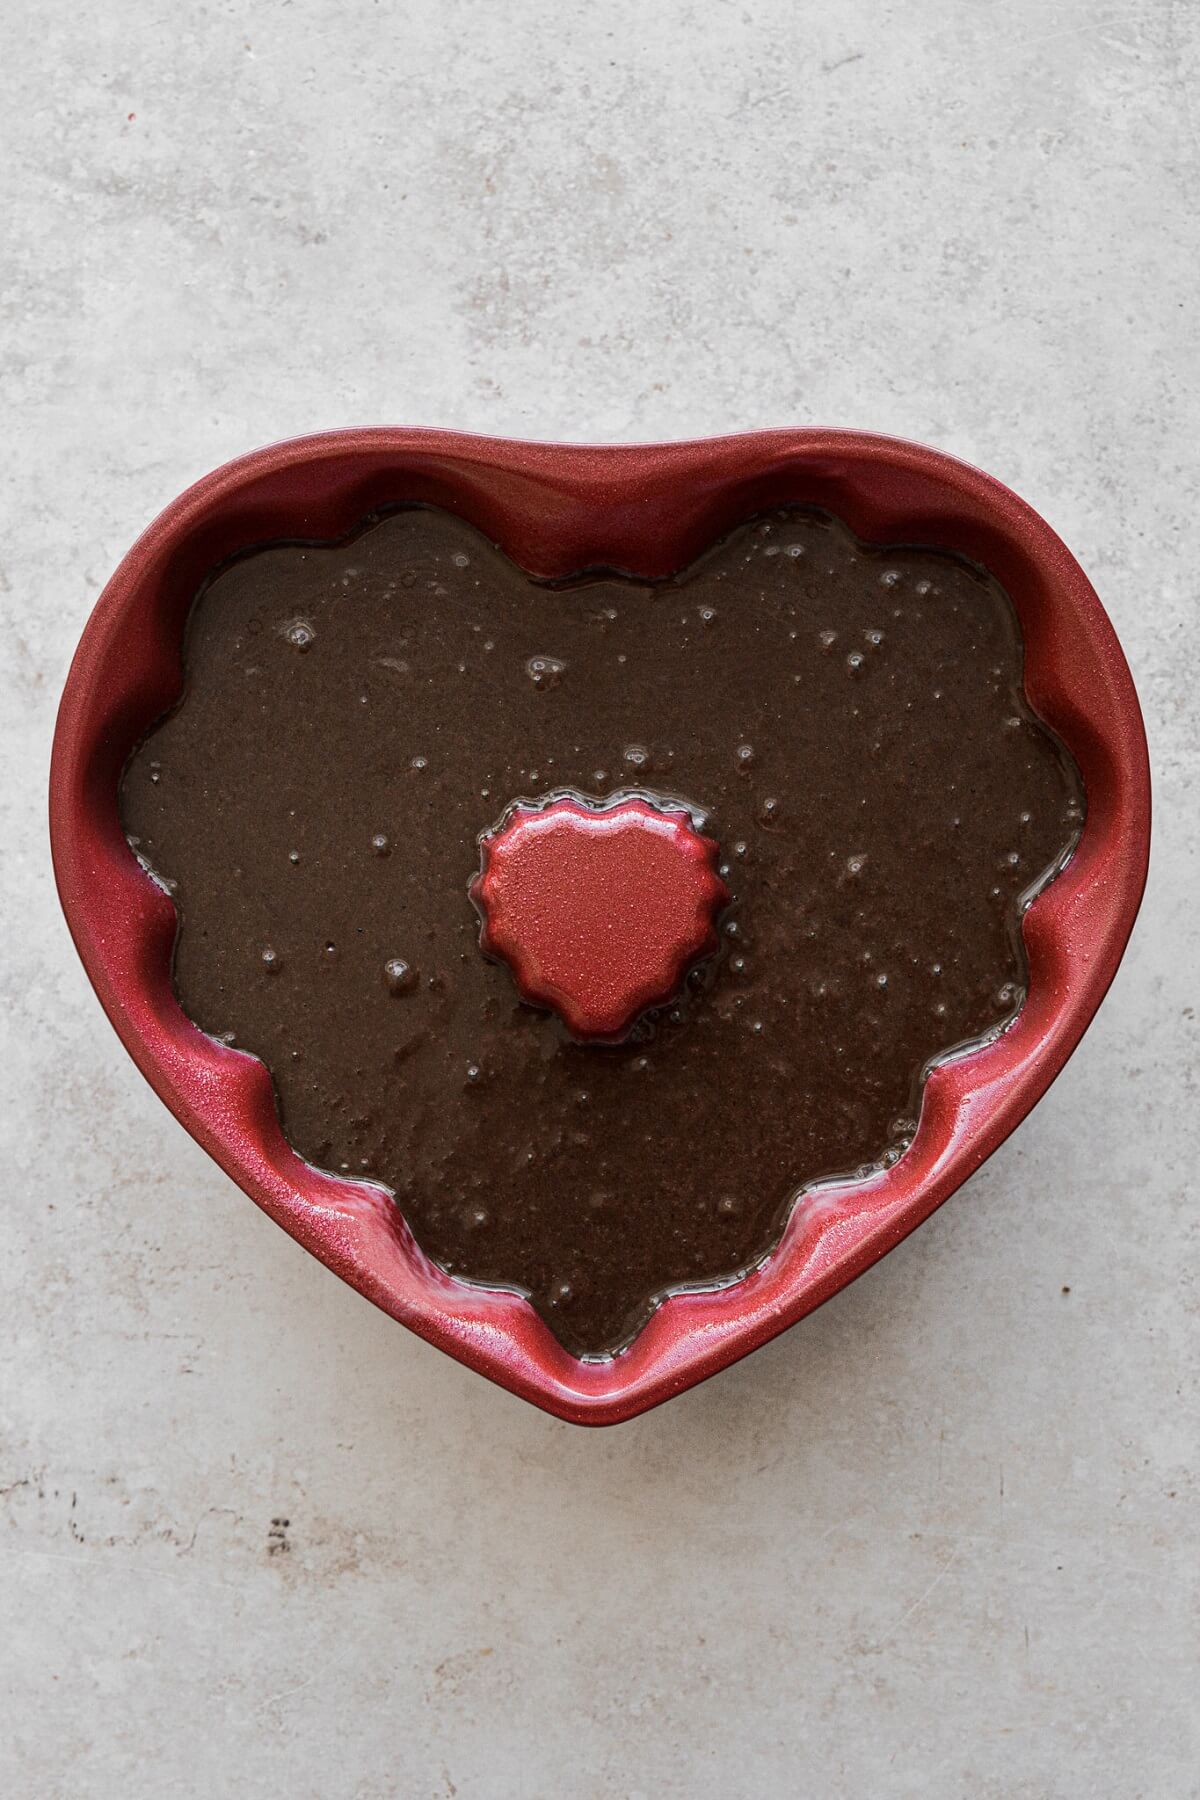 Chocolate cake batter in a heart chaped bundt pan.